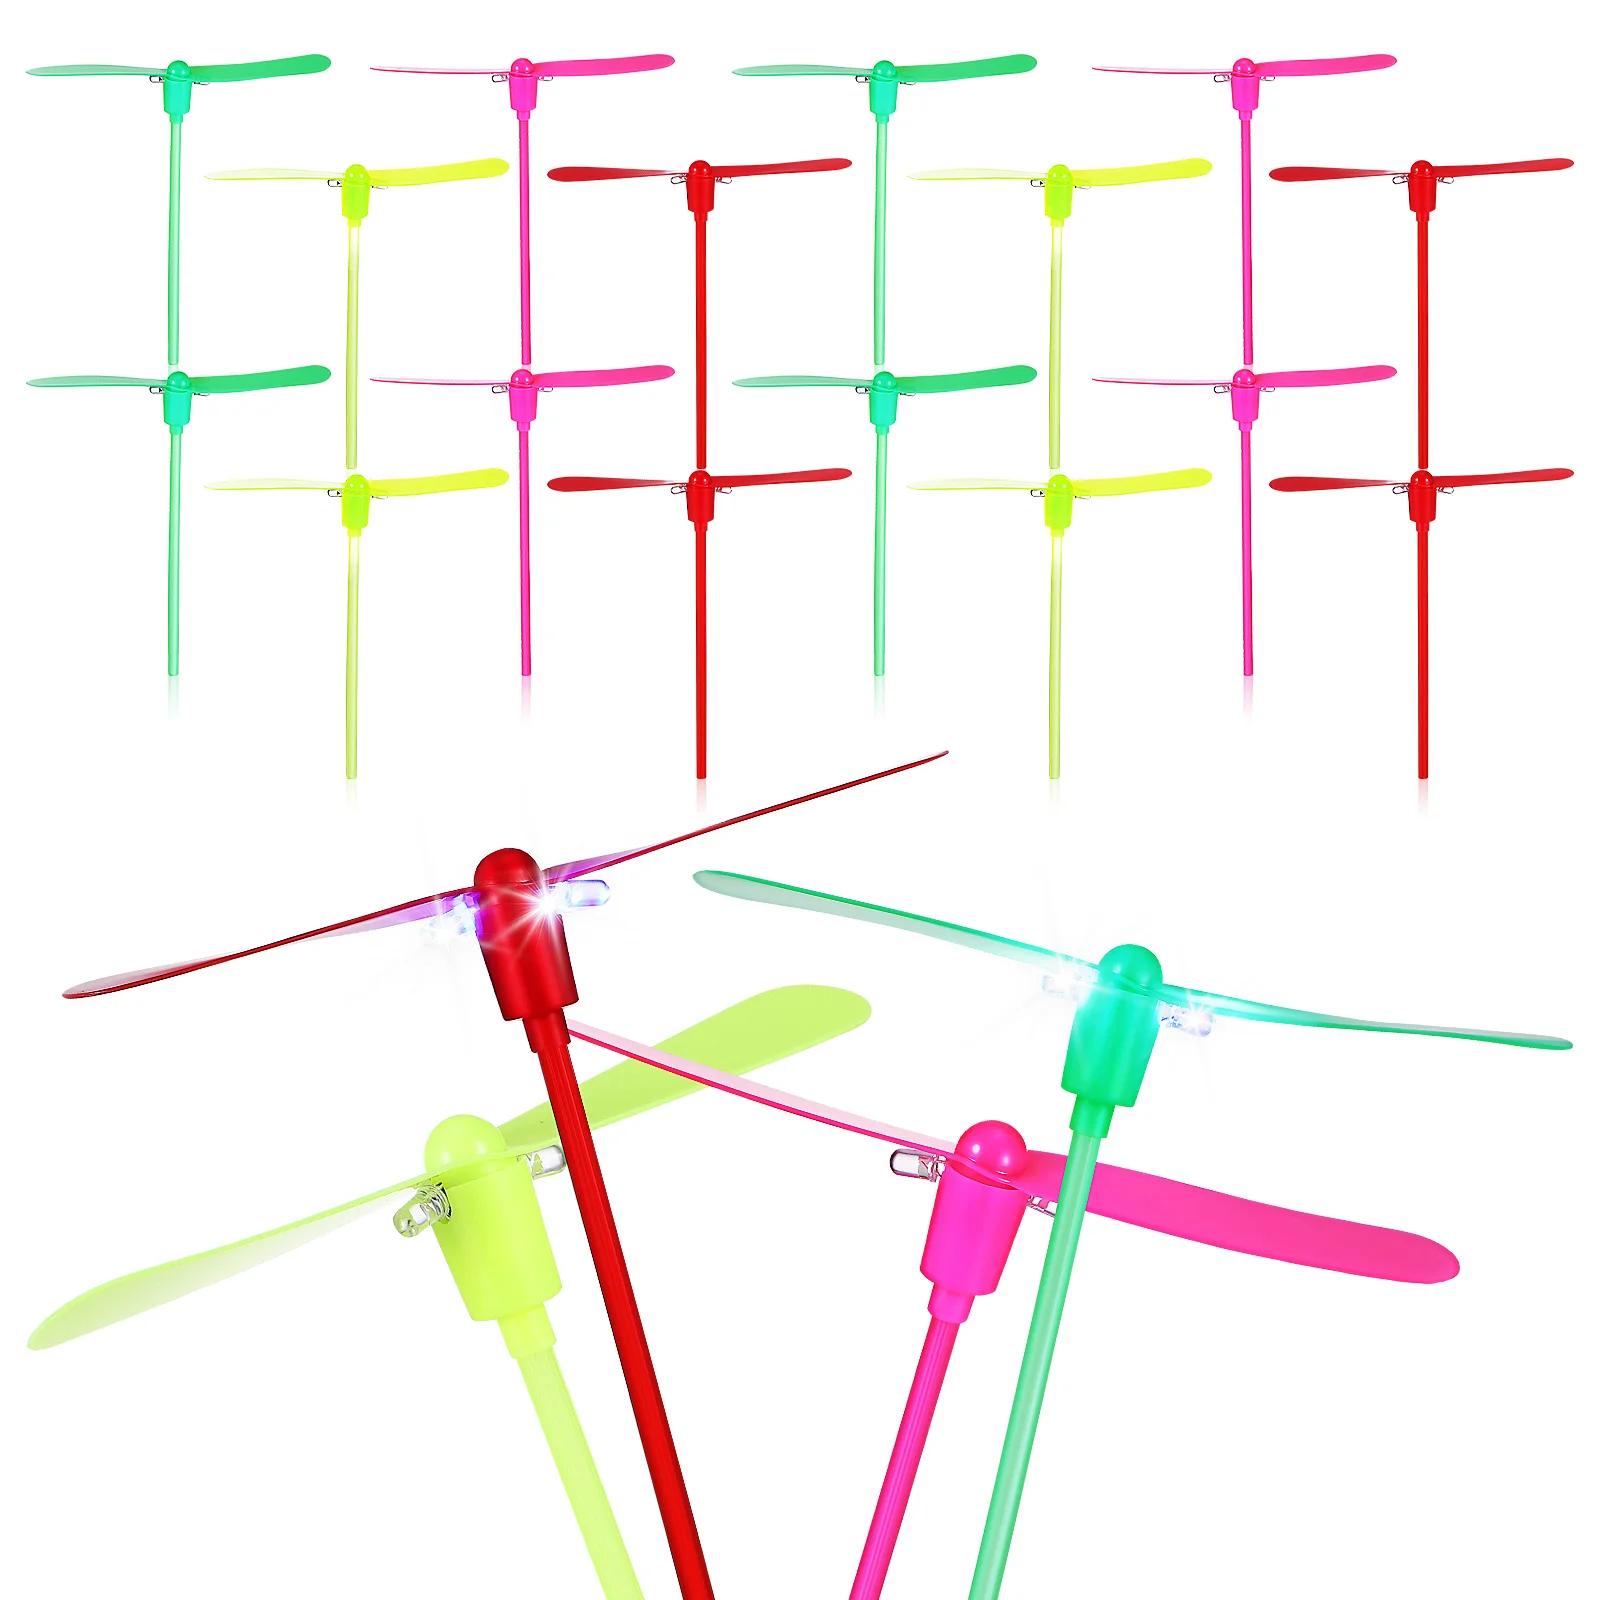 

24 Pcs Glowing Bamboo Dragonfly Childrens Toys Outdoor Rotating Flying Swirling Bulk Propeller Plastic Light Party